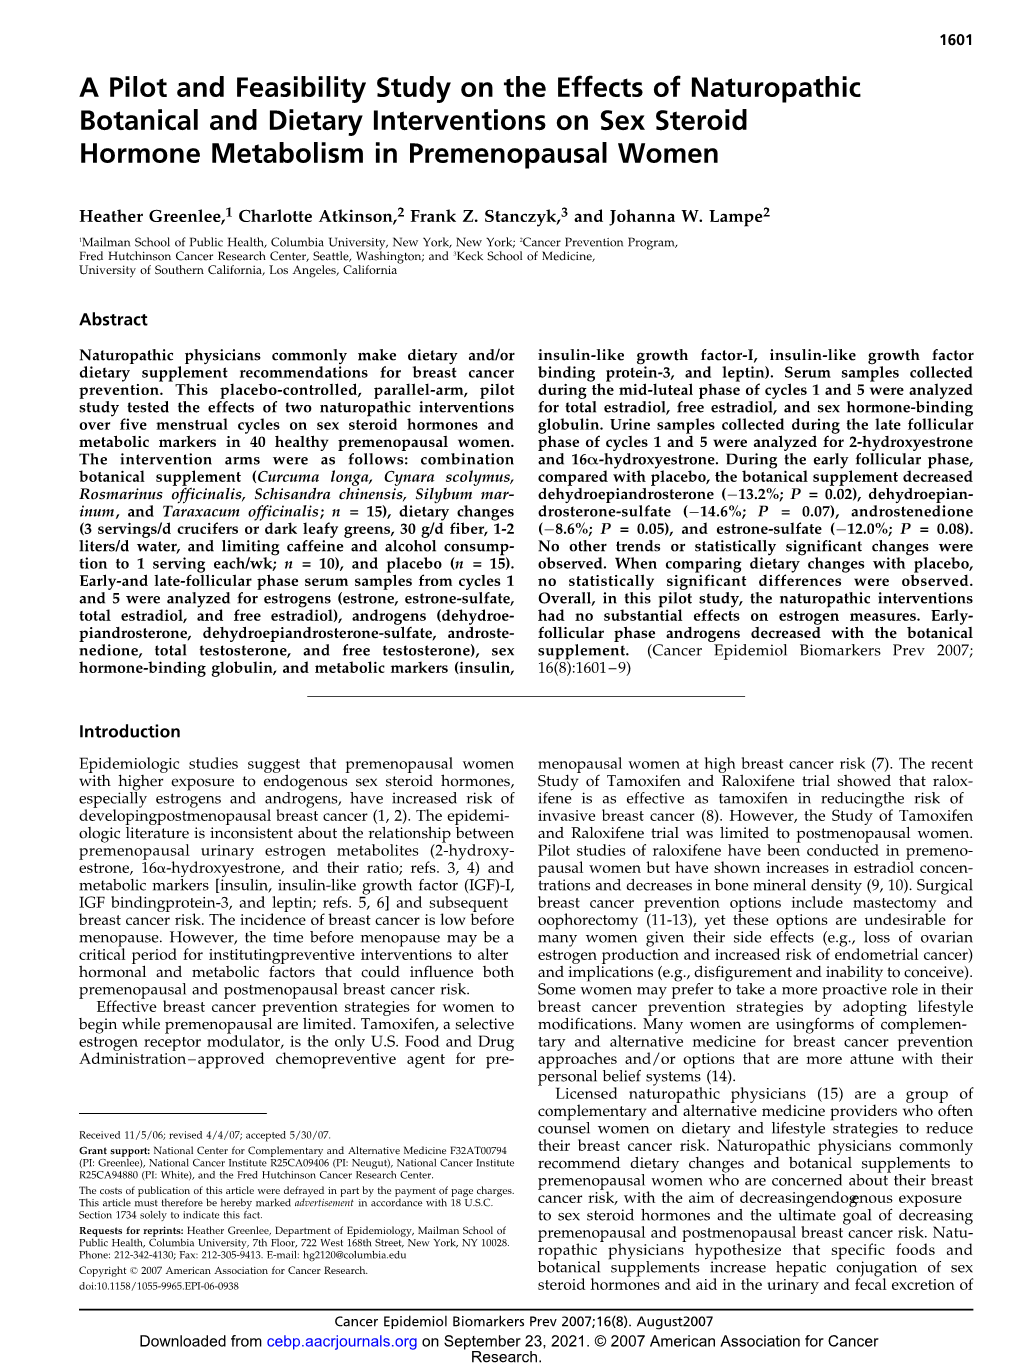 A Pilot and Feasibility Study on the Effects of Naturopathic Botanical and Dietary Interventions on Sex Steroid Hormone Metabolism in Premenopausal Women